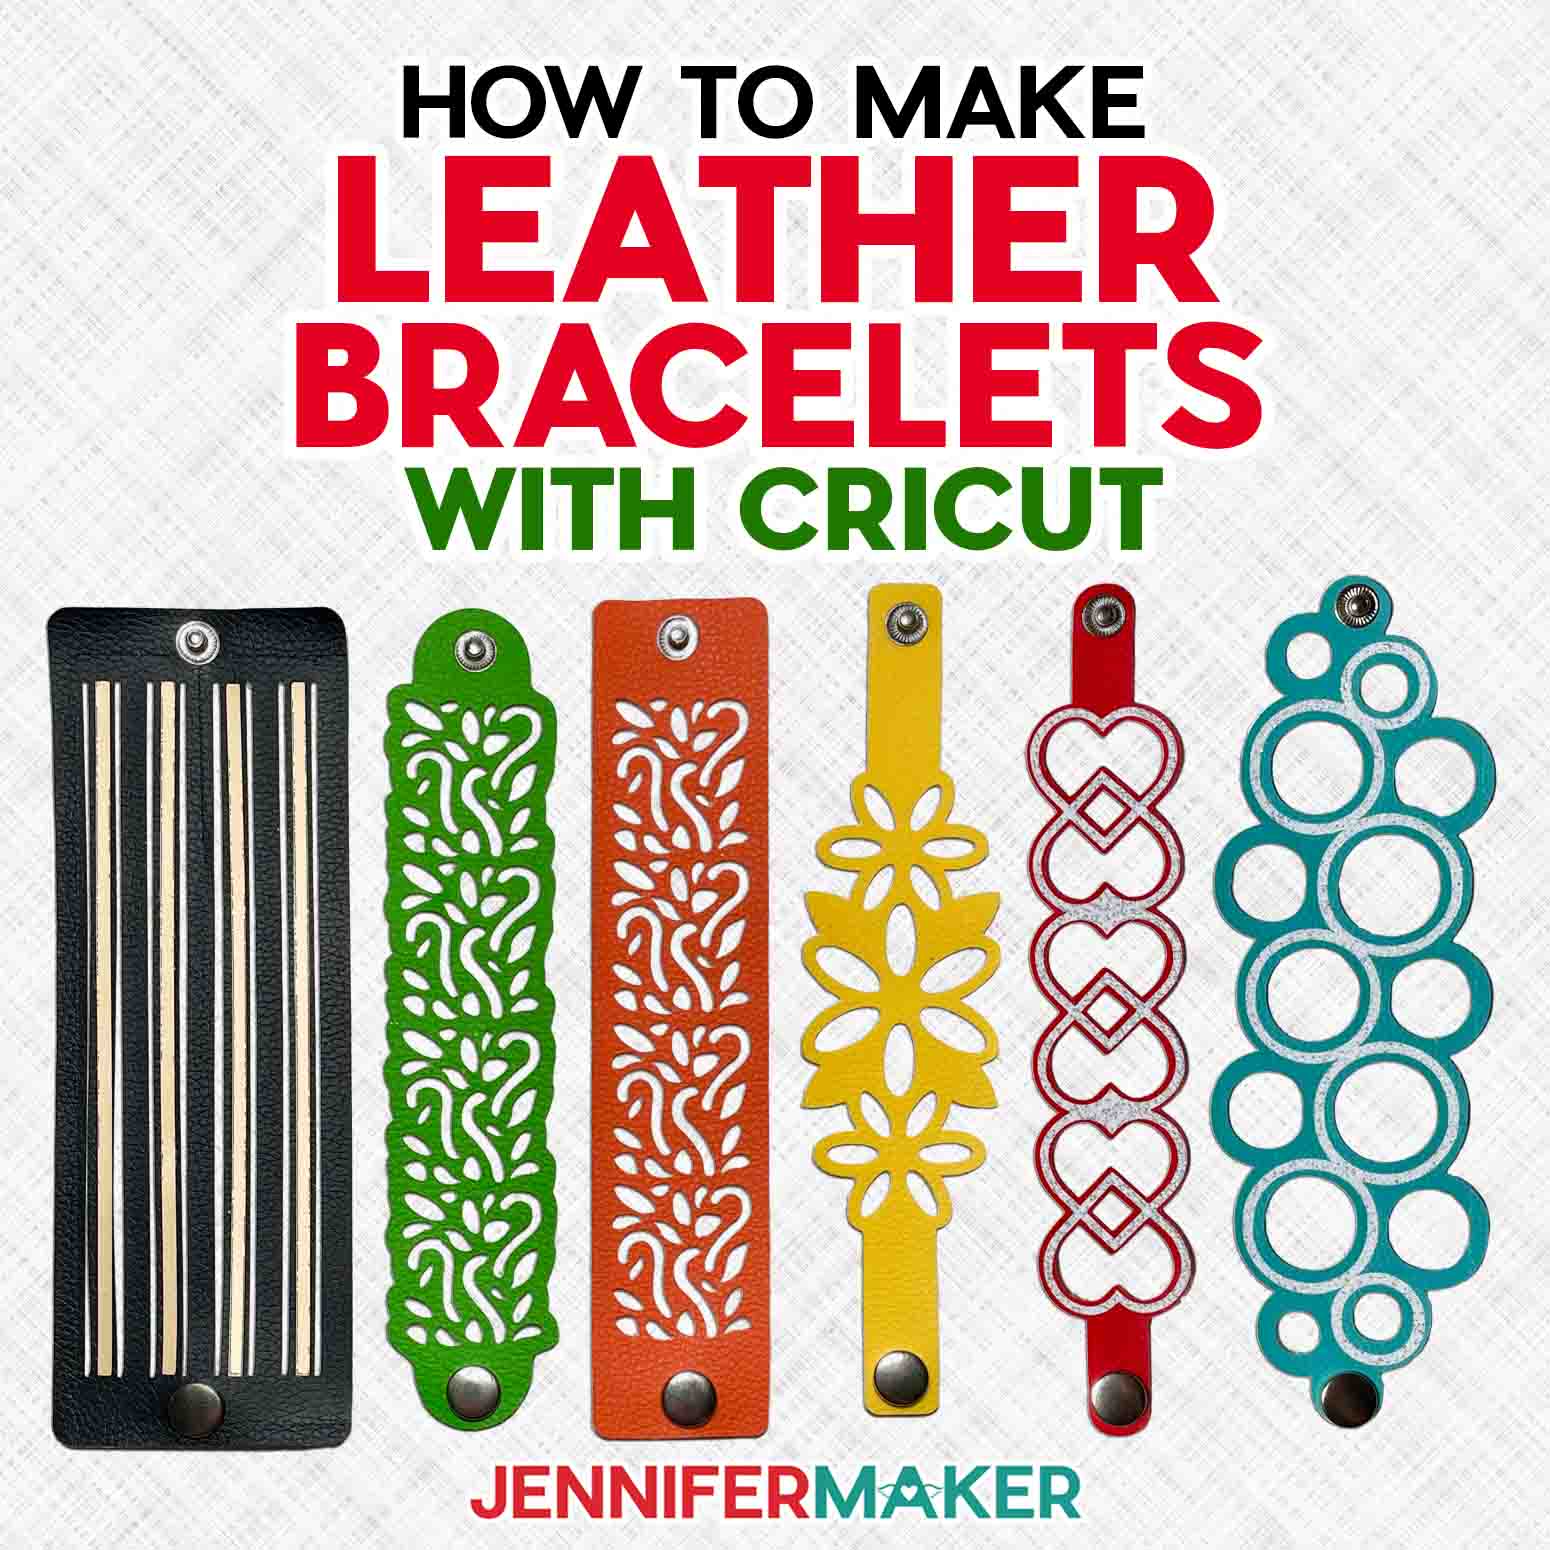 How To Make Leather Bracelets With Cricut